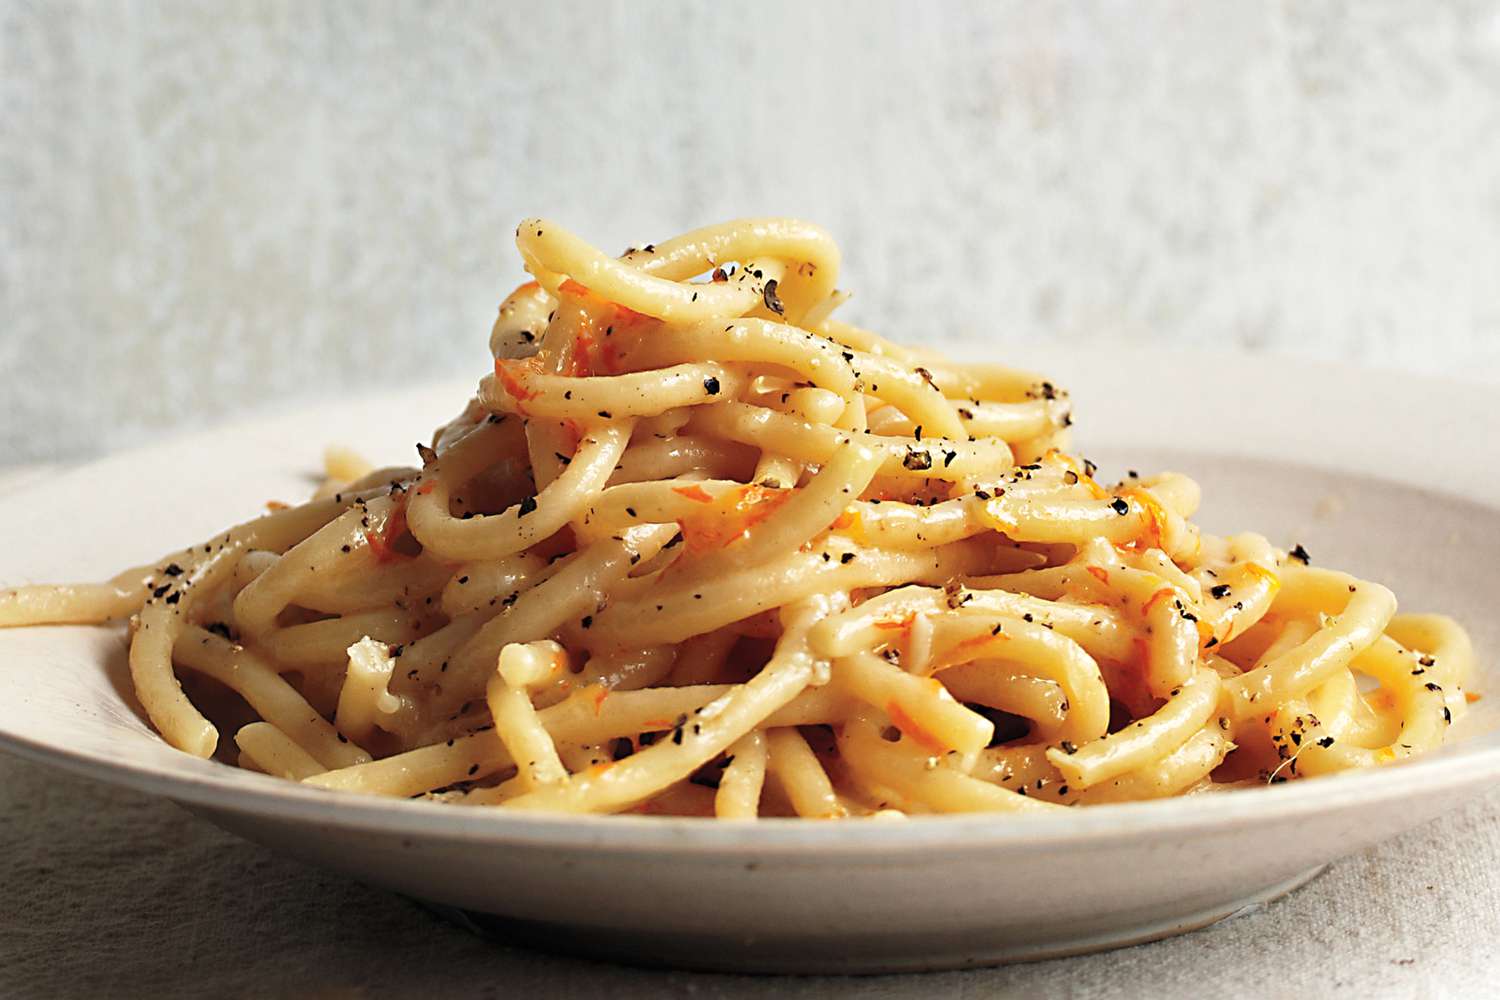 Learn How to Make Perfect Cacio e Pepe at Home with Our Step-by-Step Visual Guide